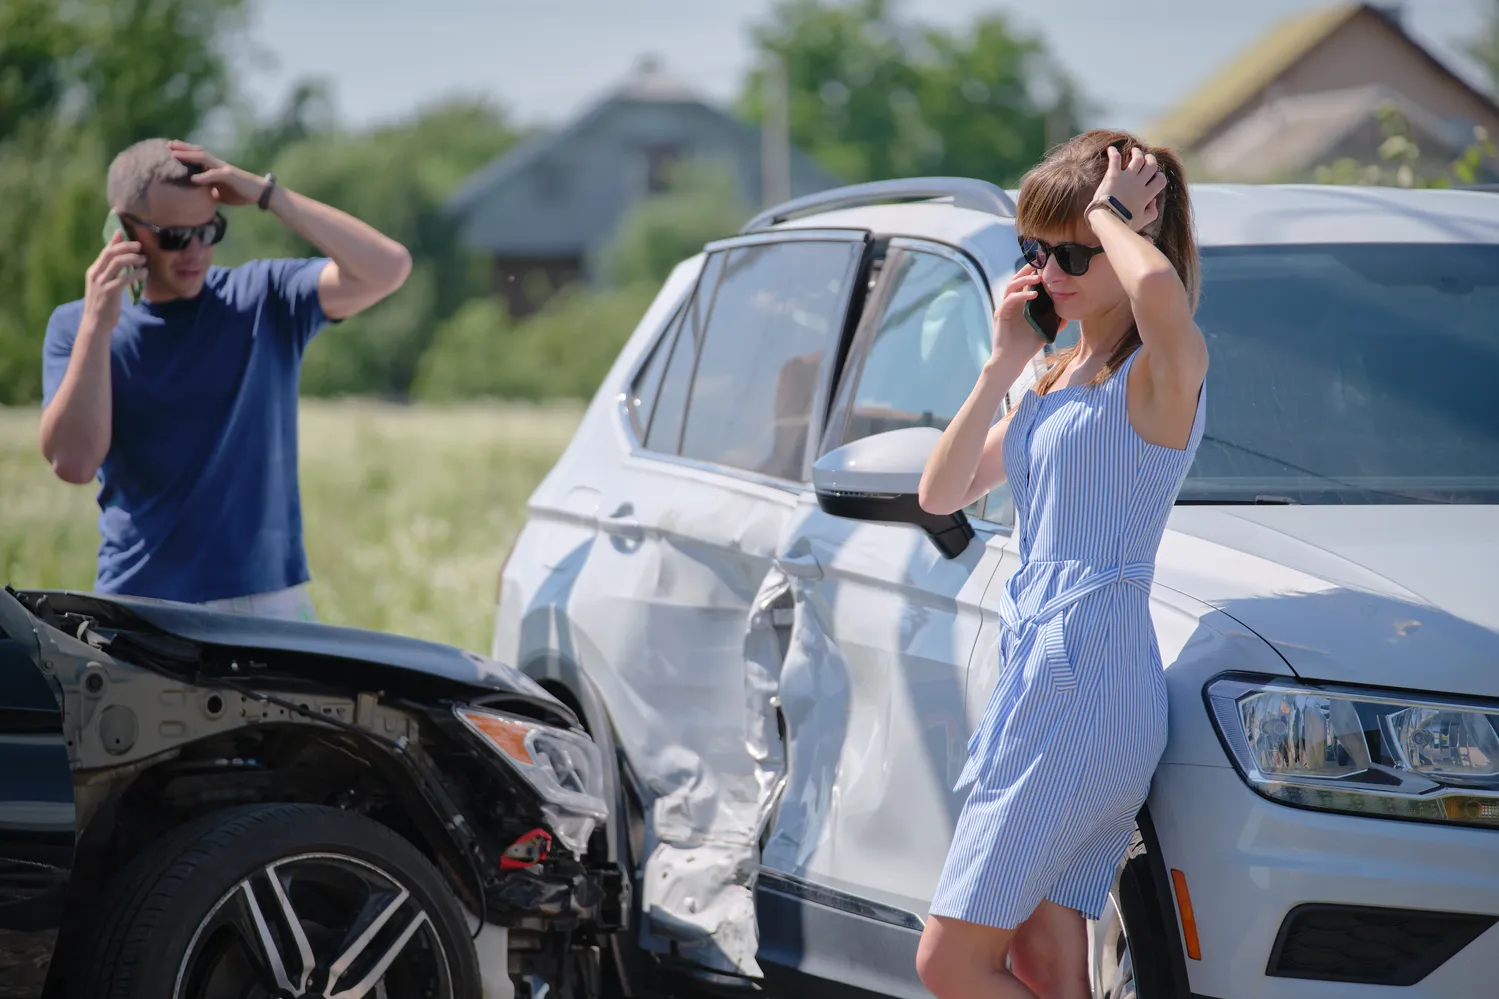 Two people on their phones after a T-bone car accident